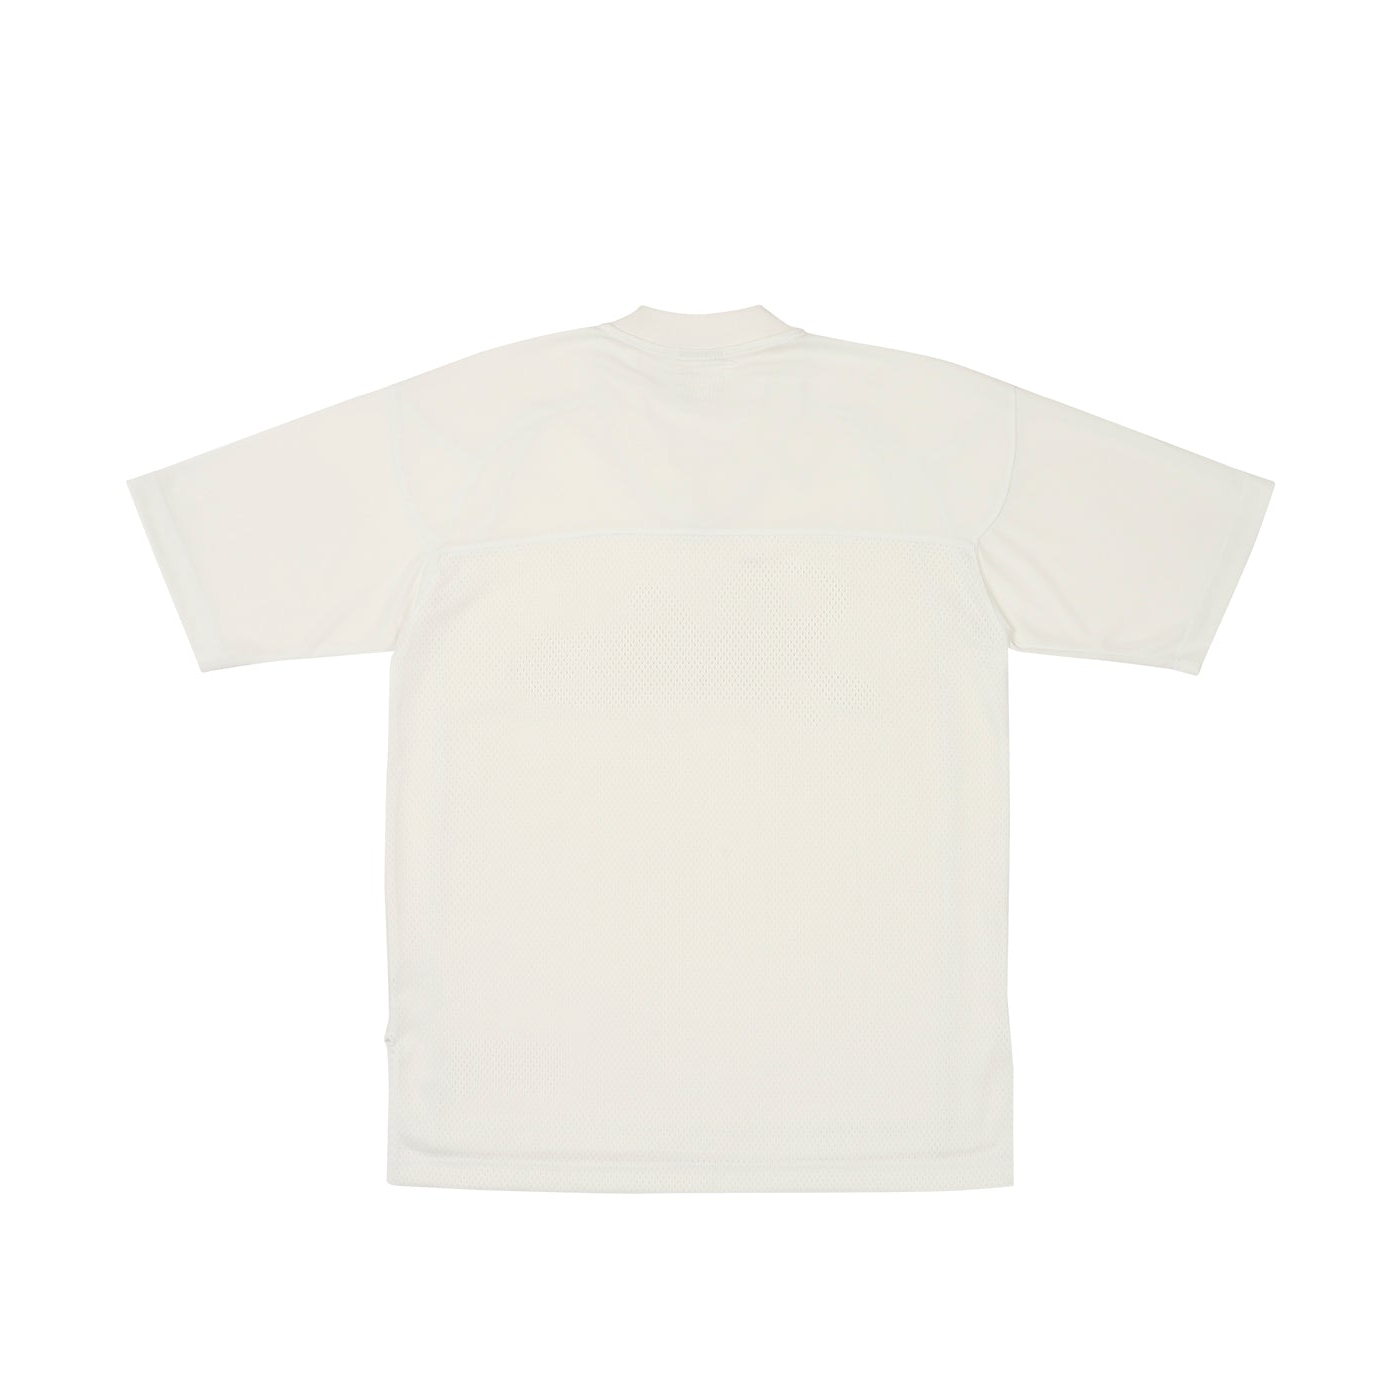 Thumbnail CONTENDER MESH JERSEY WHITE one color